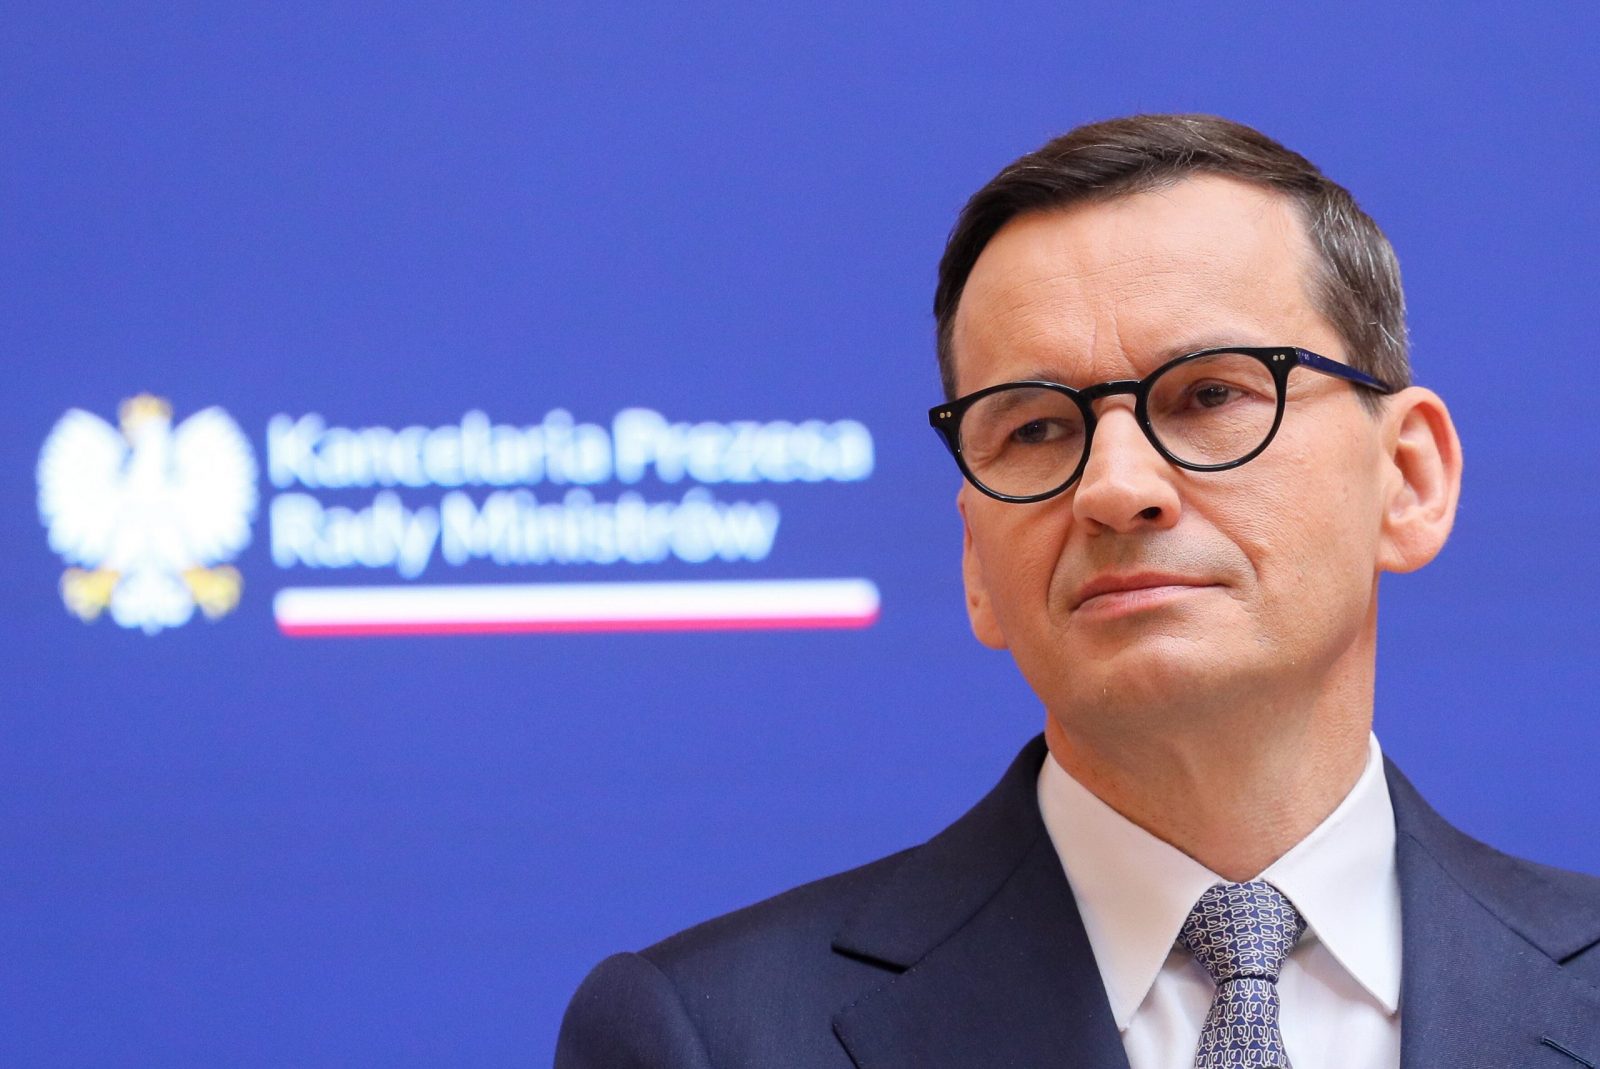 epa10681184 Polish Prime Minister Mateusz Morawiecki looks on as he attends a press conference at the Chancellery of the Prime Minister in Warsaw, Poland, 09 June 2023. The Polish Prime Minister has said Poland will not agree to the EU's latest migrant relocation scheme and will not pay for migrants it refuses to admit. The government's position on migration will remain unchanged, he added.  EPA/PAWEL SUPERNAK POLAND OUT